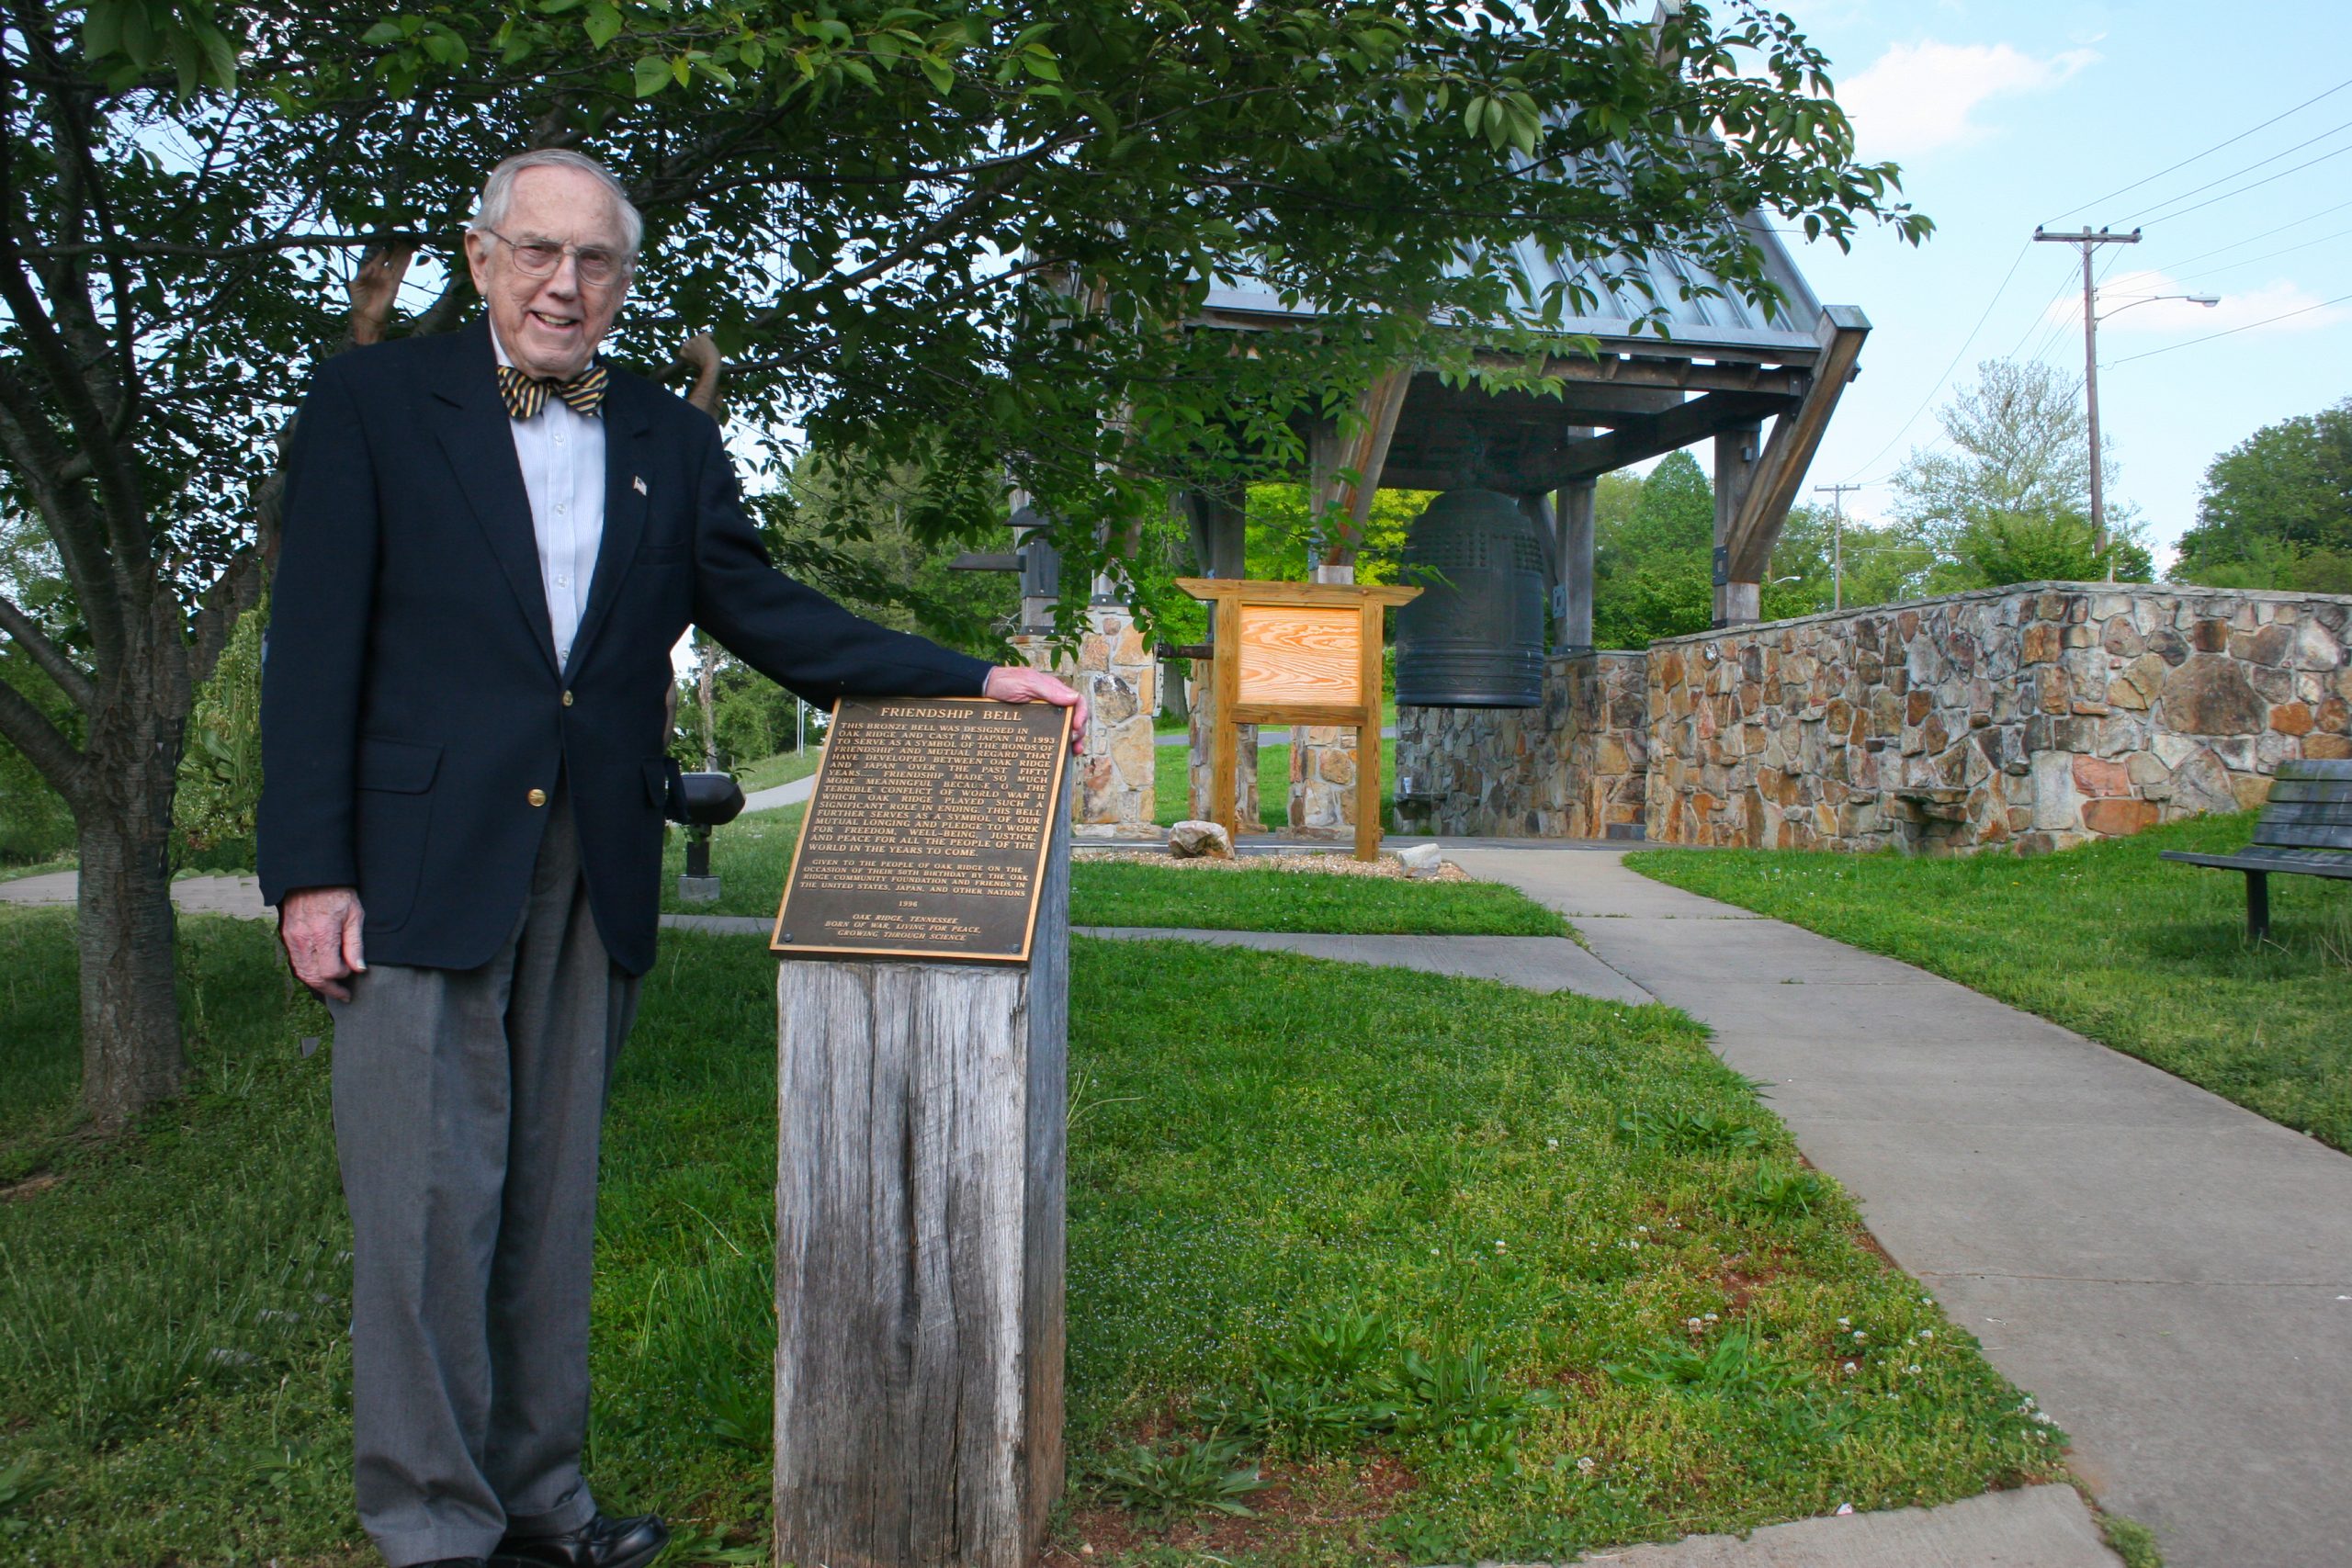 The late Bill Wilcox by the Friendship Bell. Courtesy of the Friends of the International Friendship Bell.